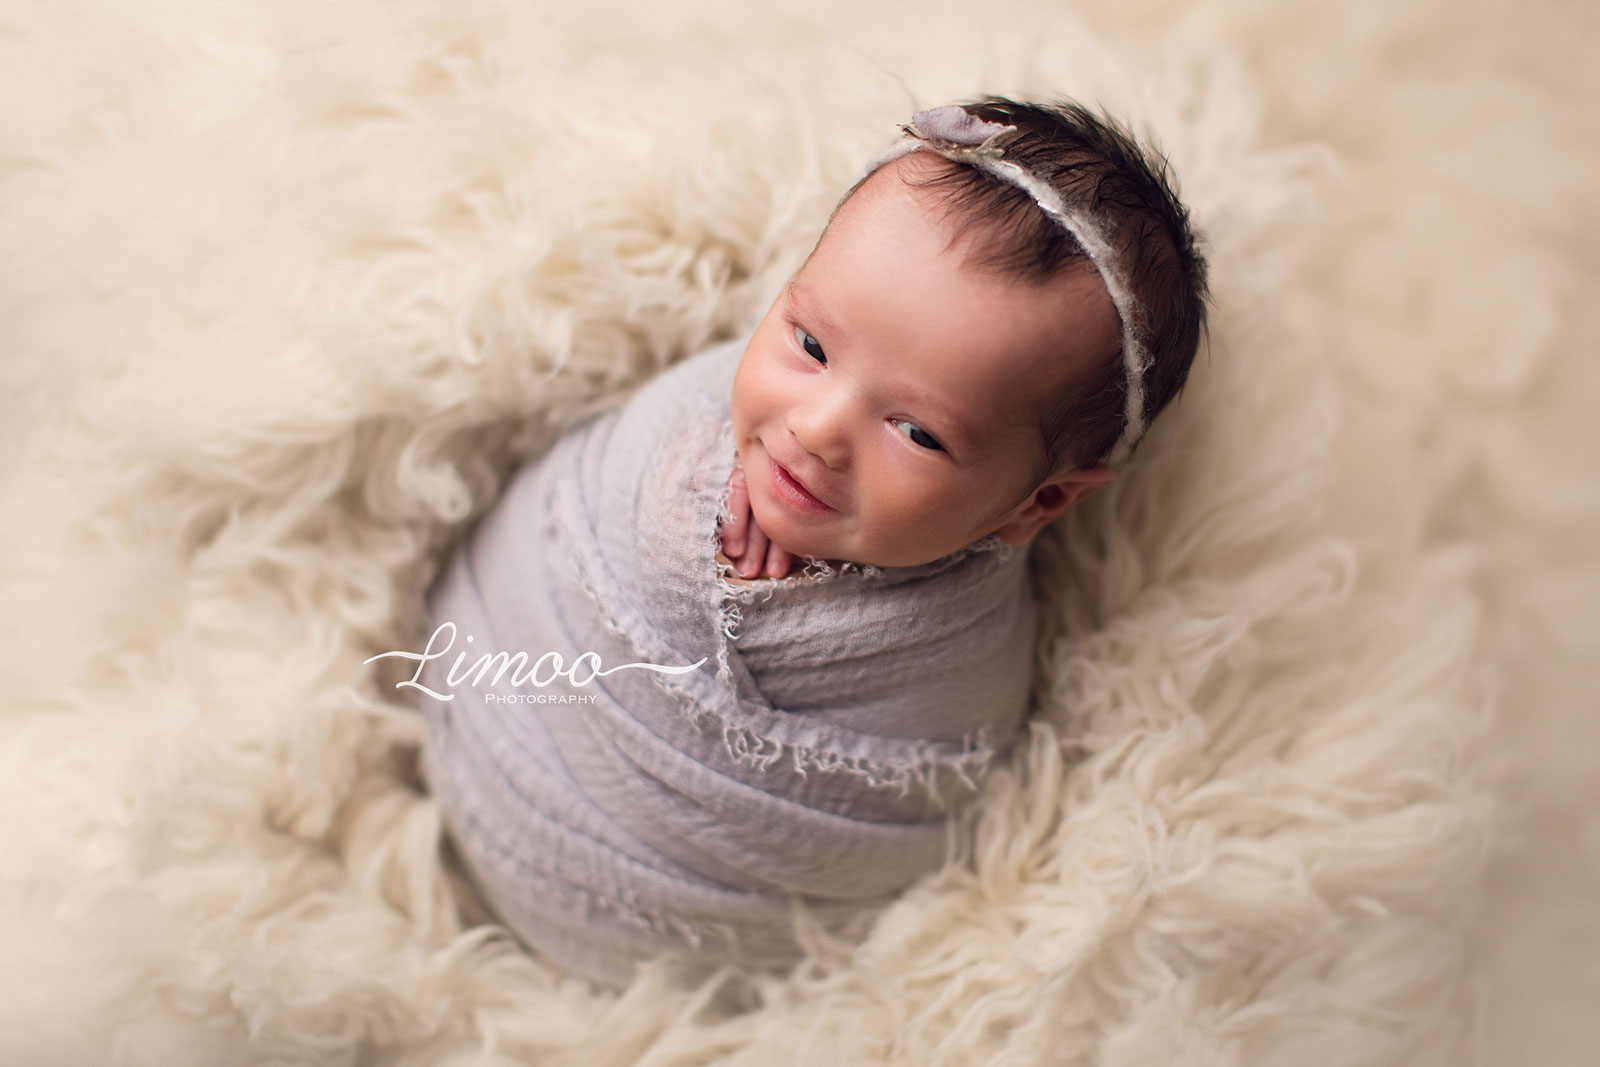 Your In-home Newborn Photography Session With Limoo Photography